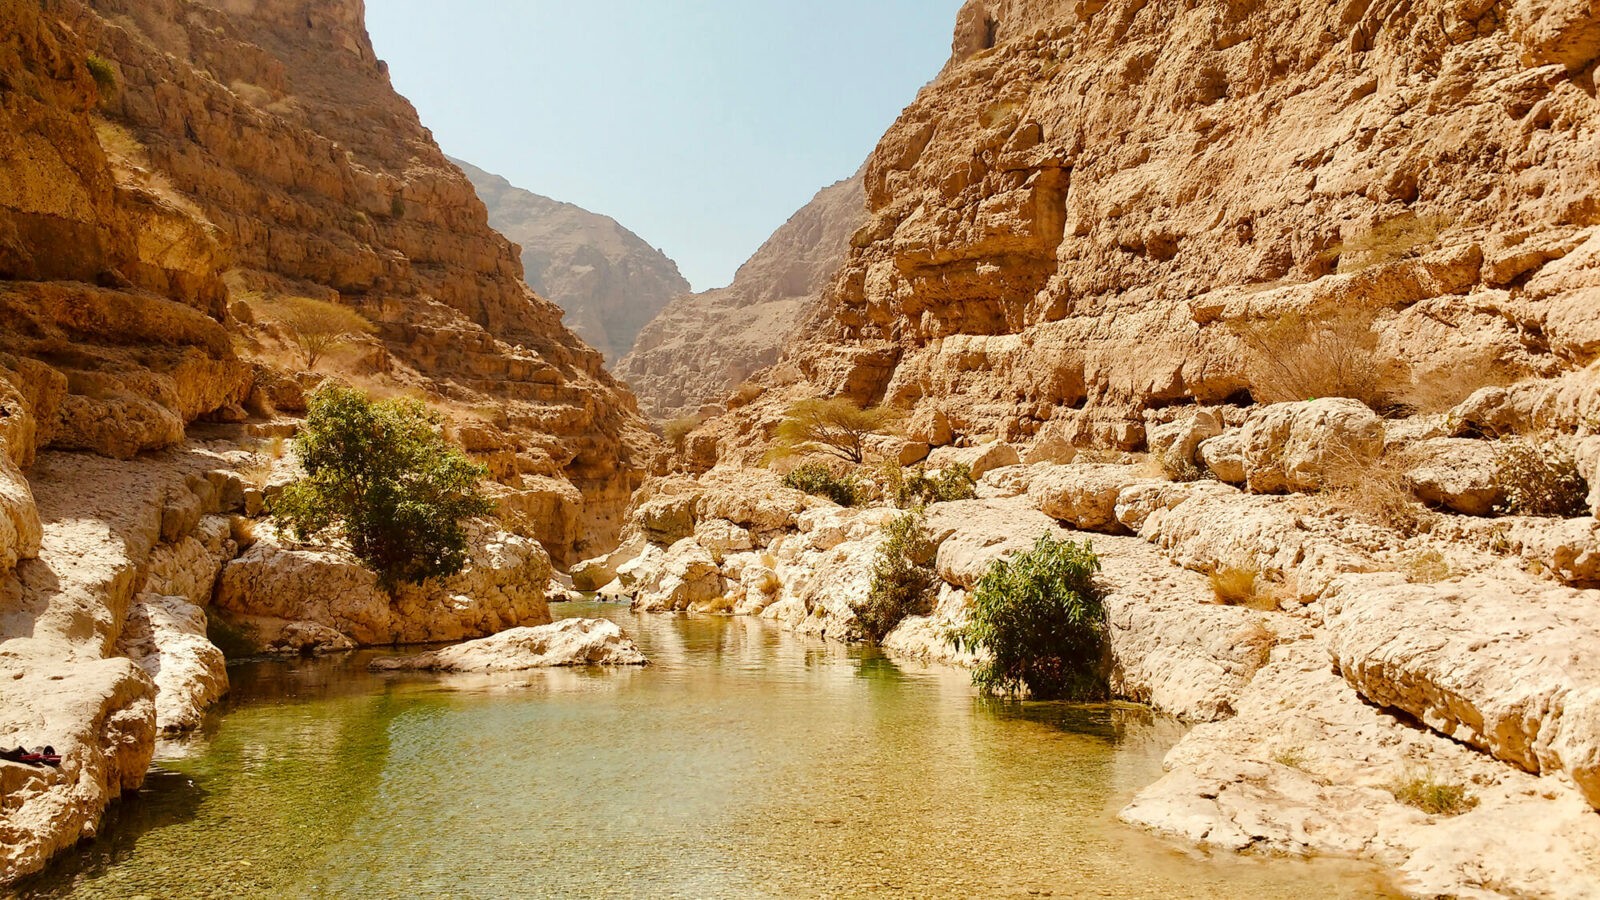 10 most incredible places to visit in Oman - Hiking Wadi Shab the secret cave in Oman.